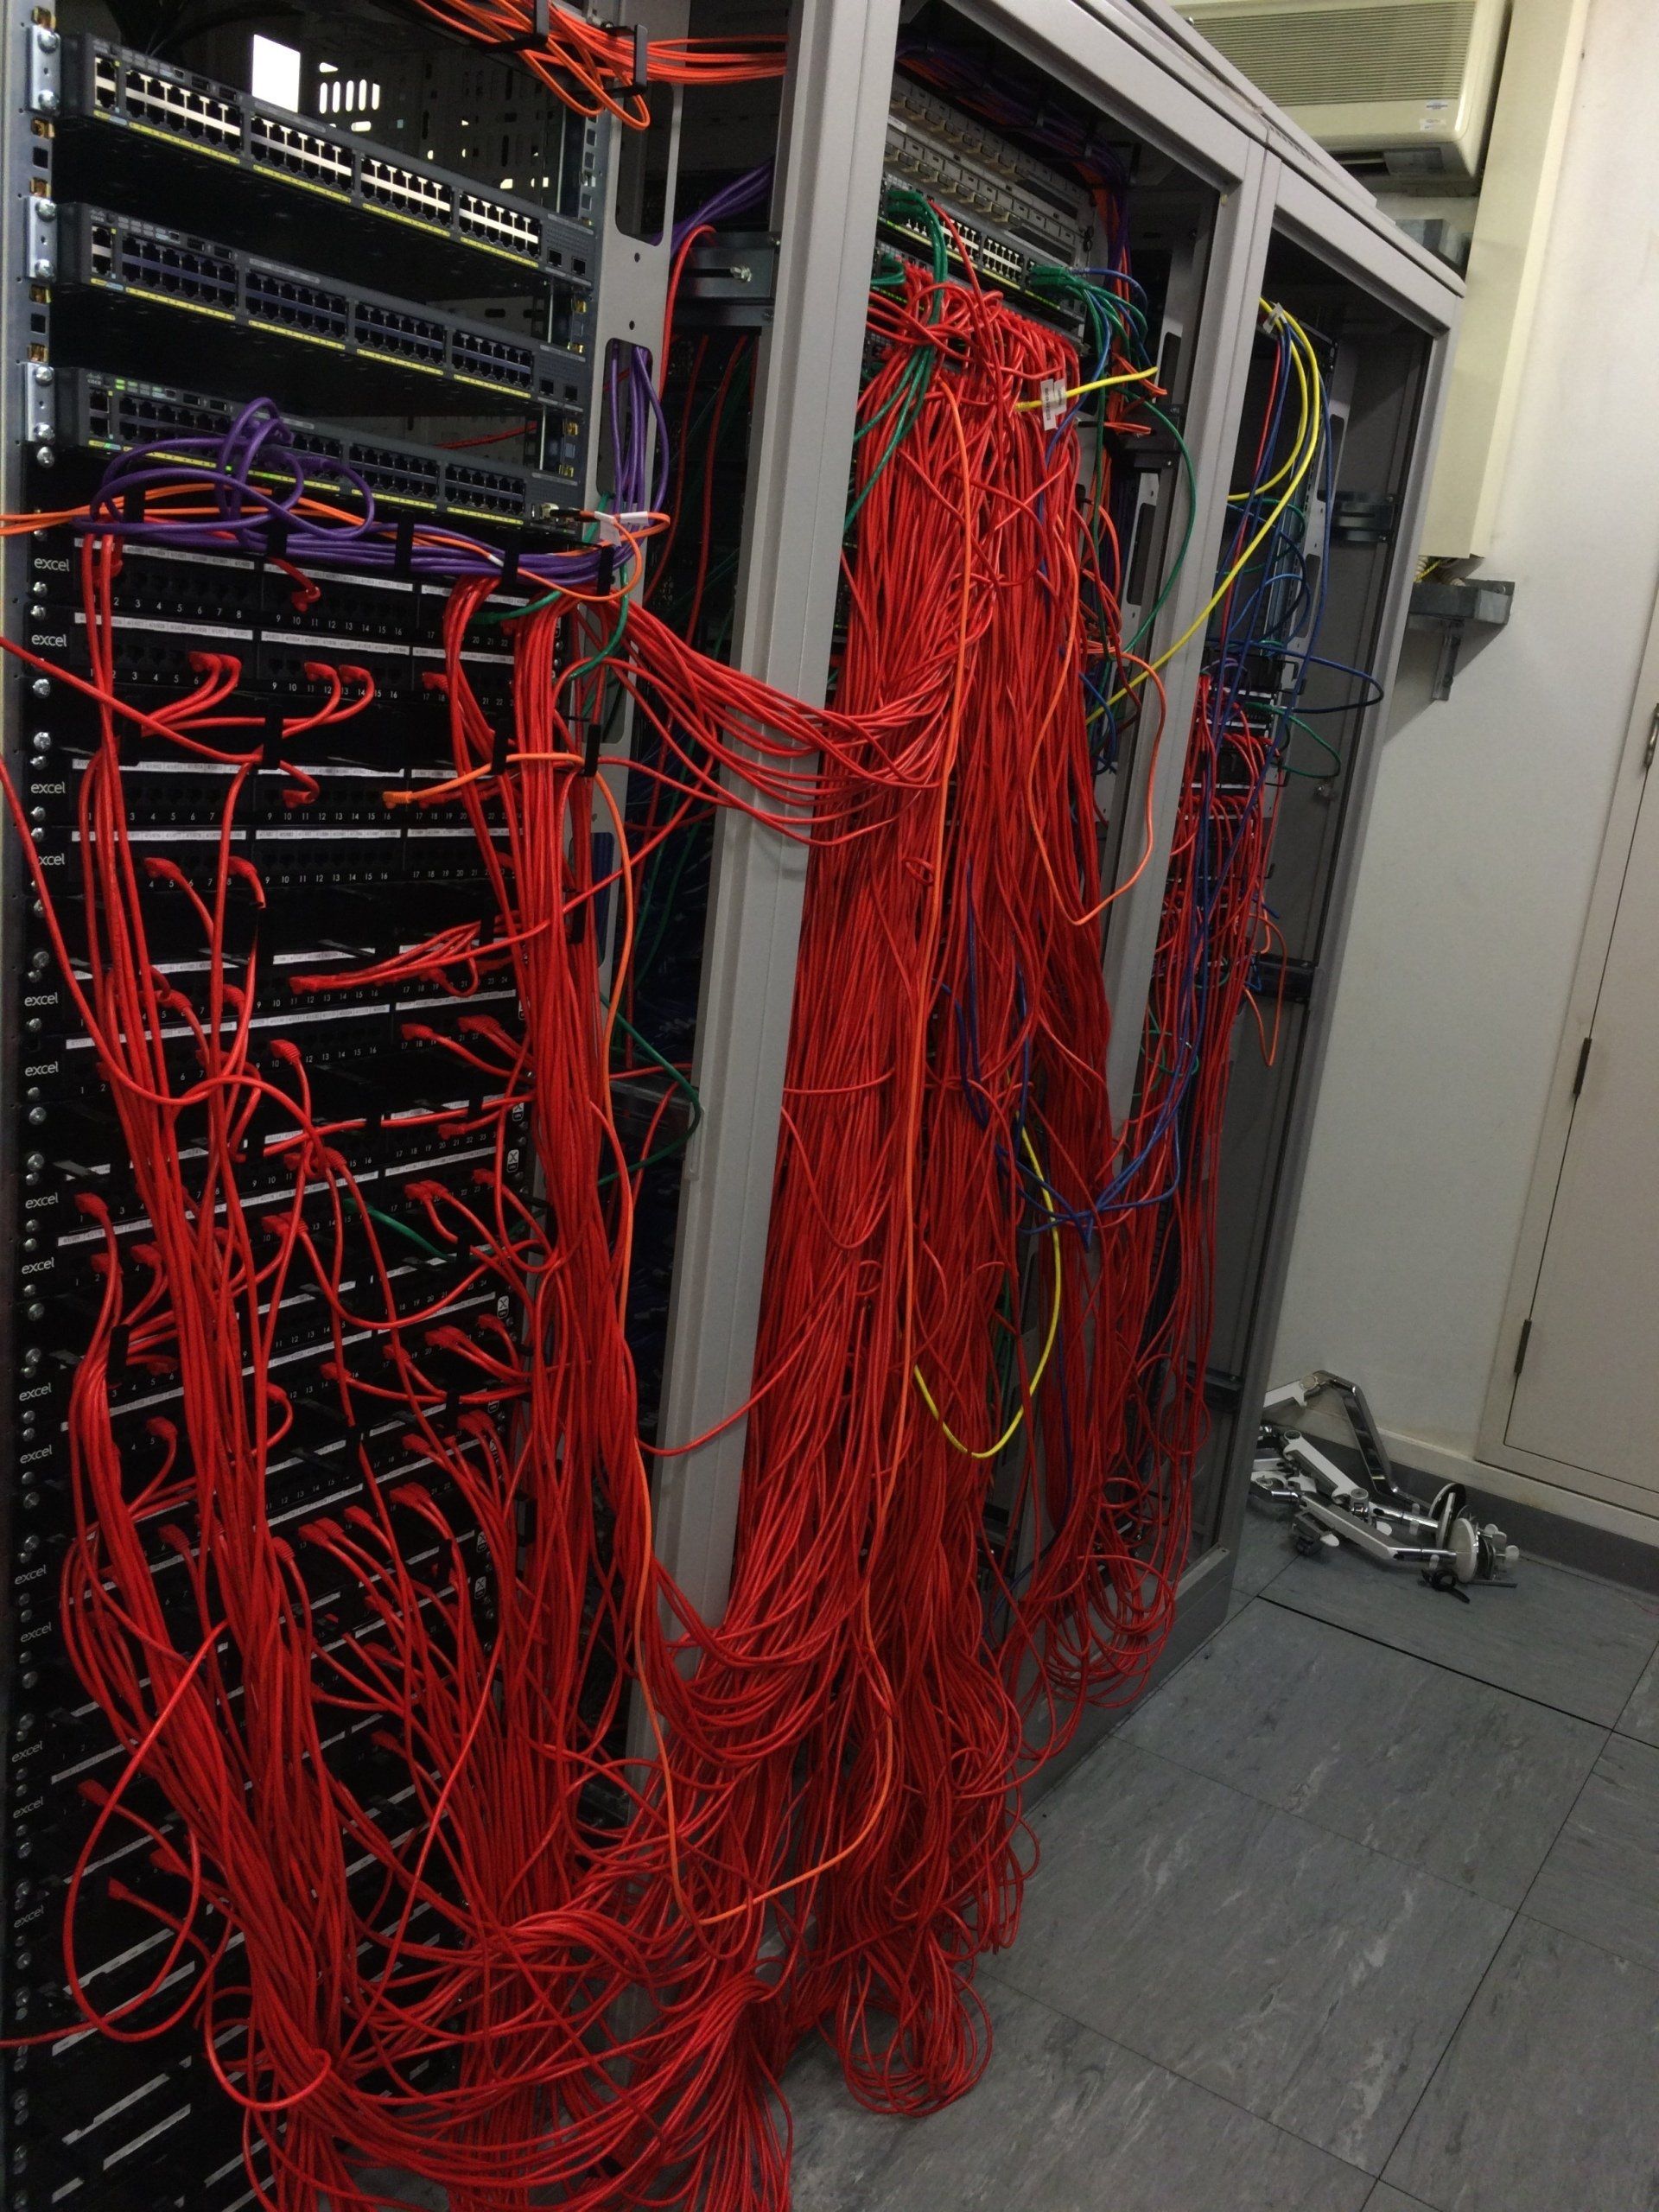 red data cables